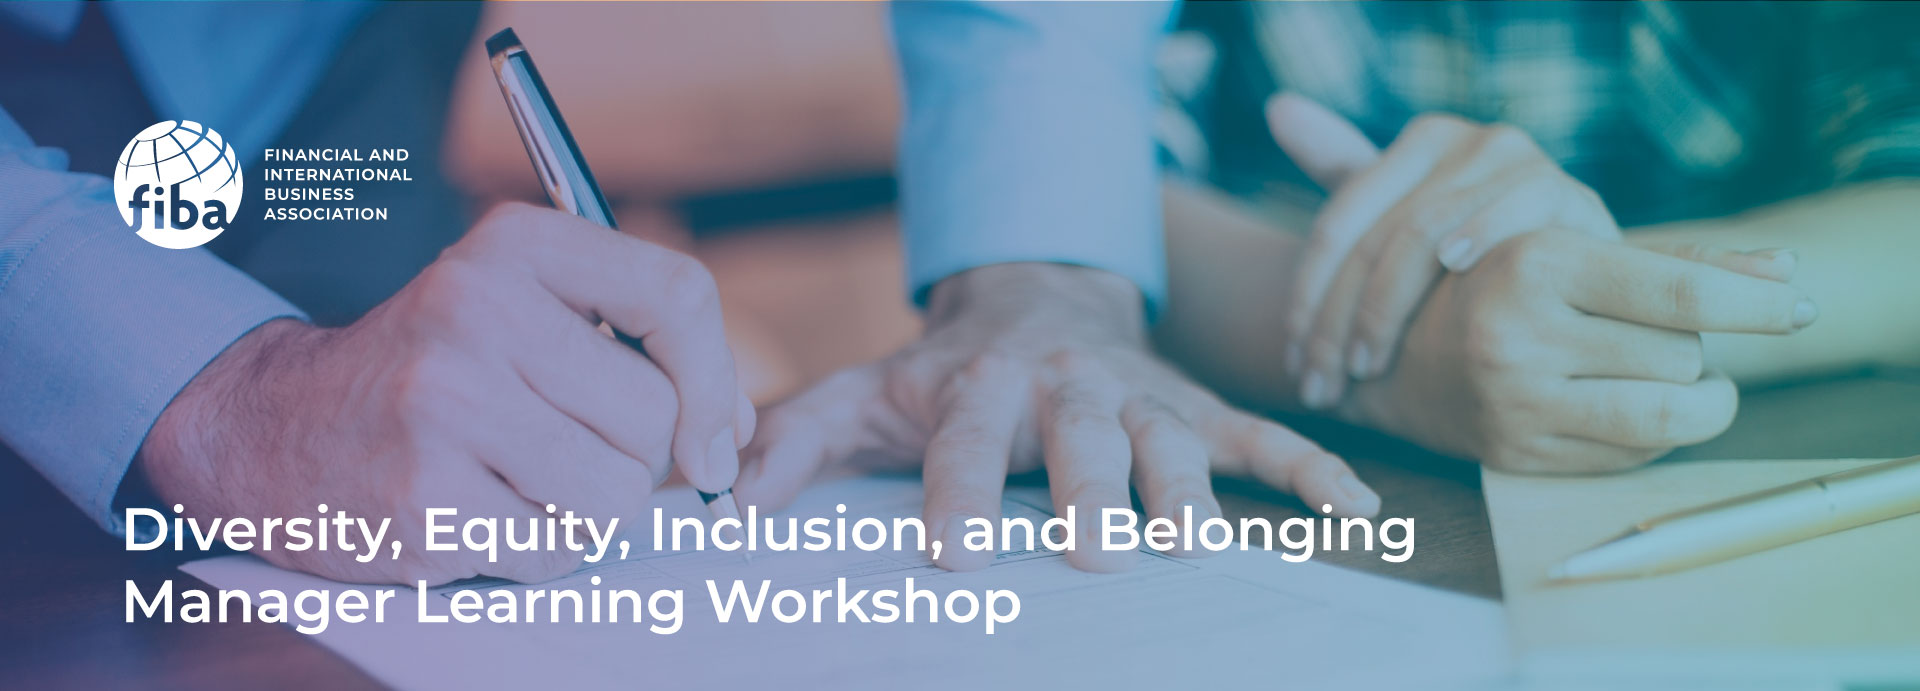 Diversity, Equity, Inclusion, and Belonging Manager Learning Workshop